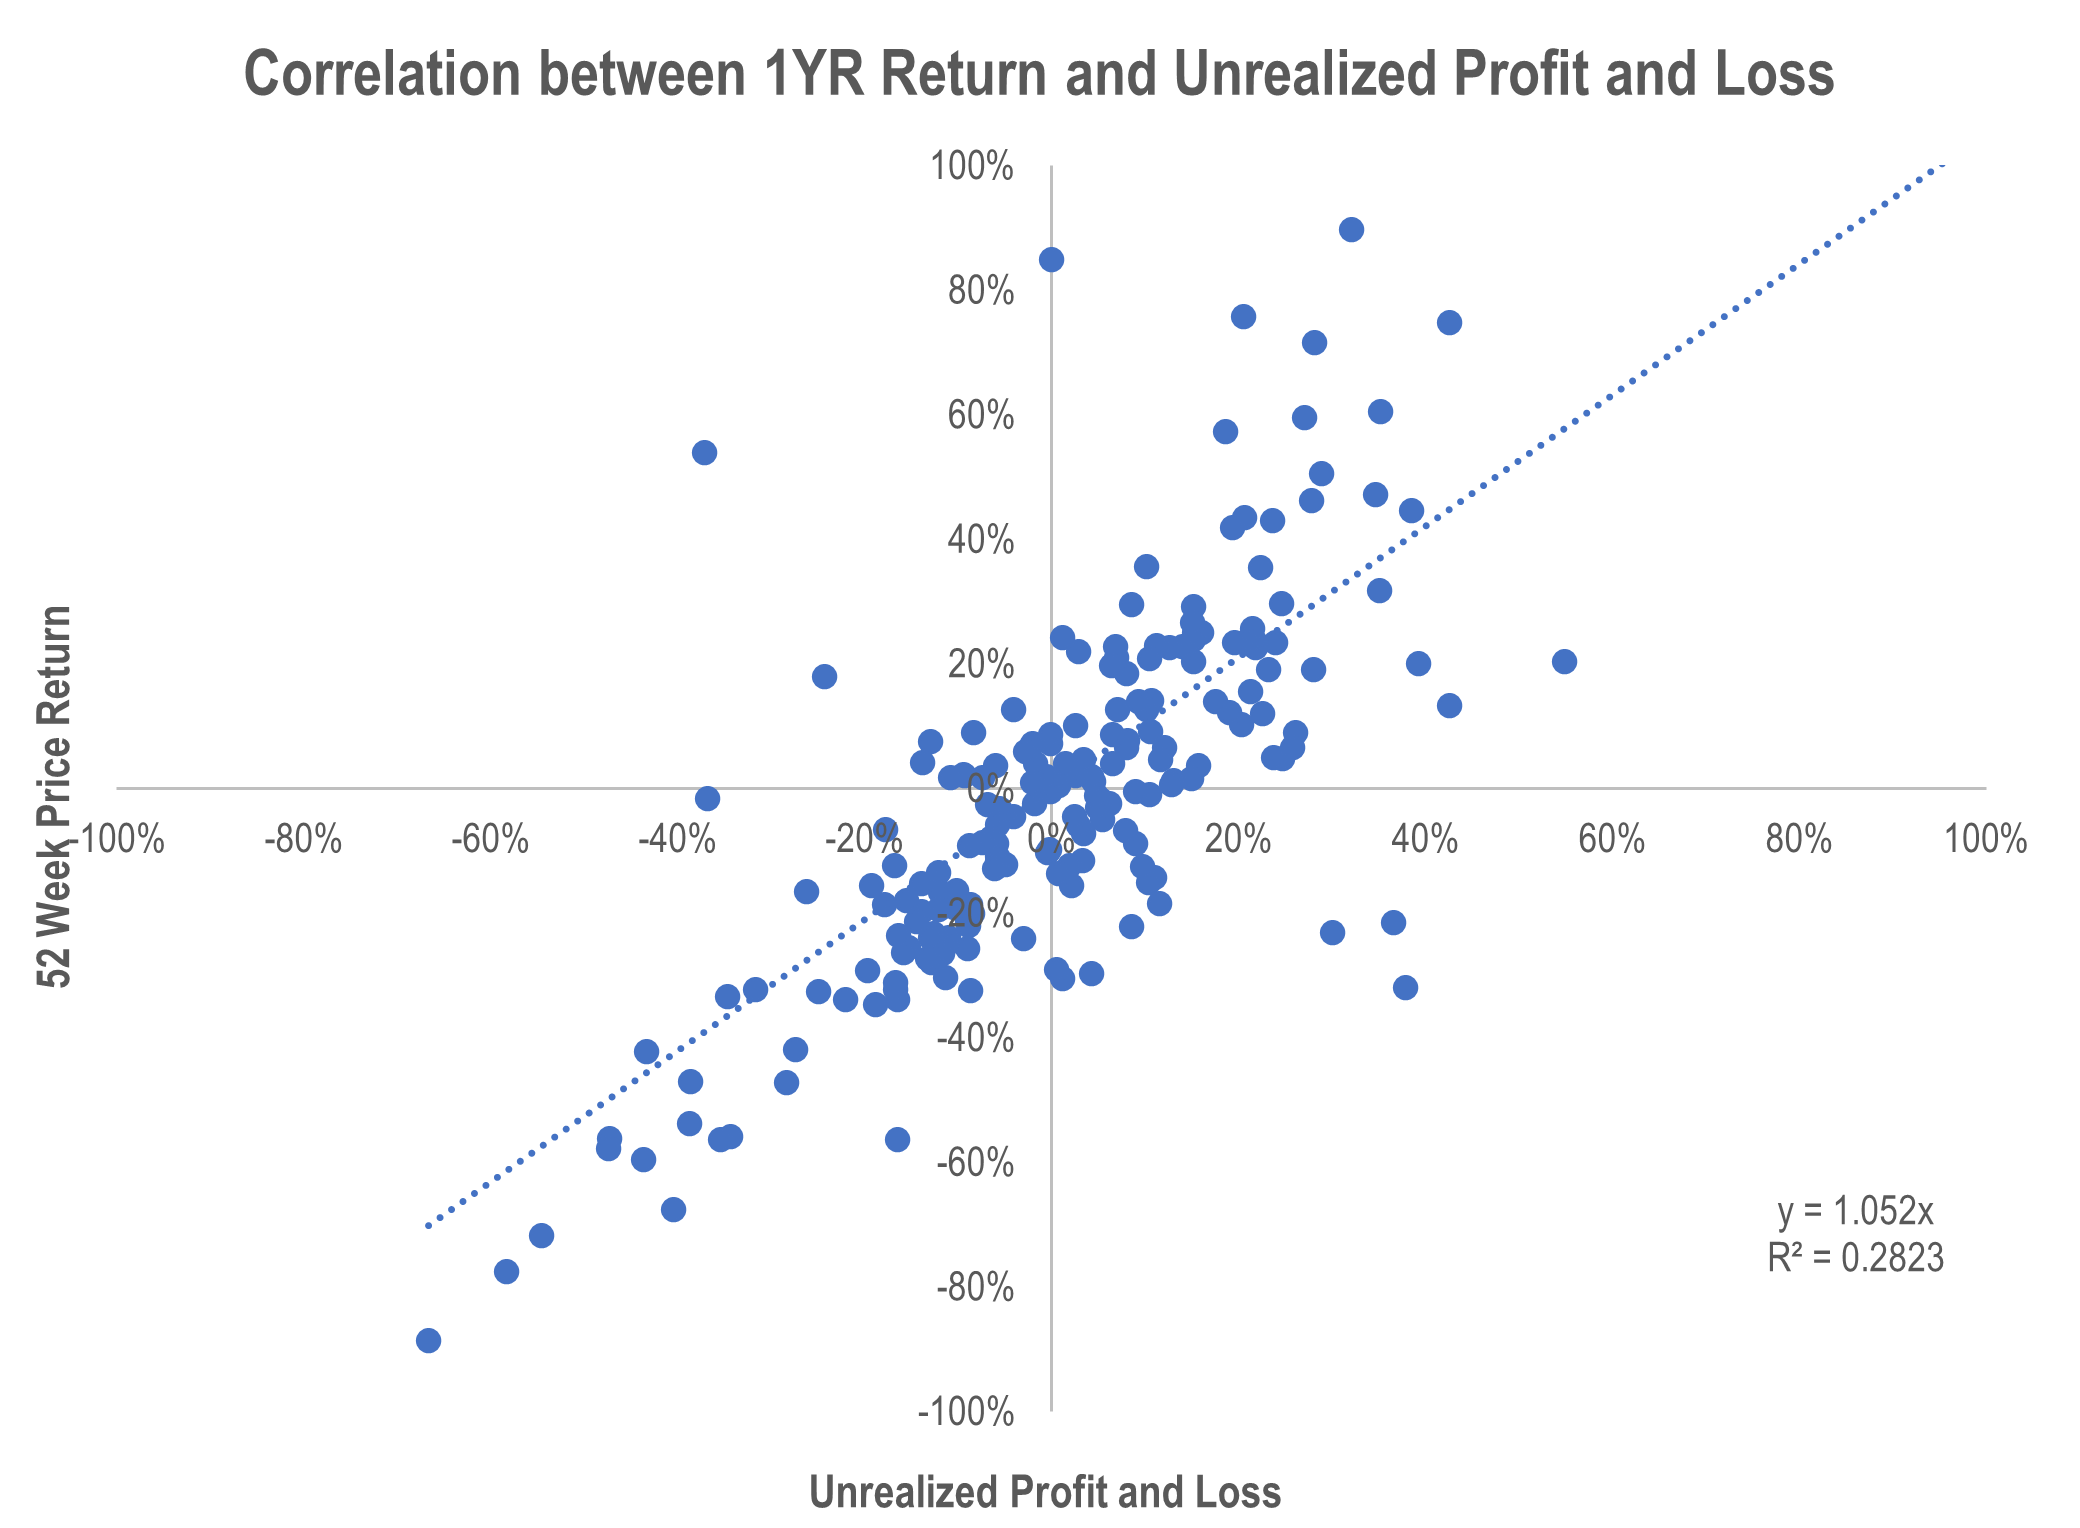 Scatter plot showing the correlation between unrealized profit and loss and one year trailing price return